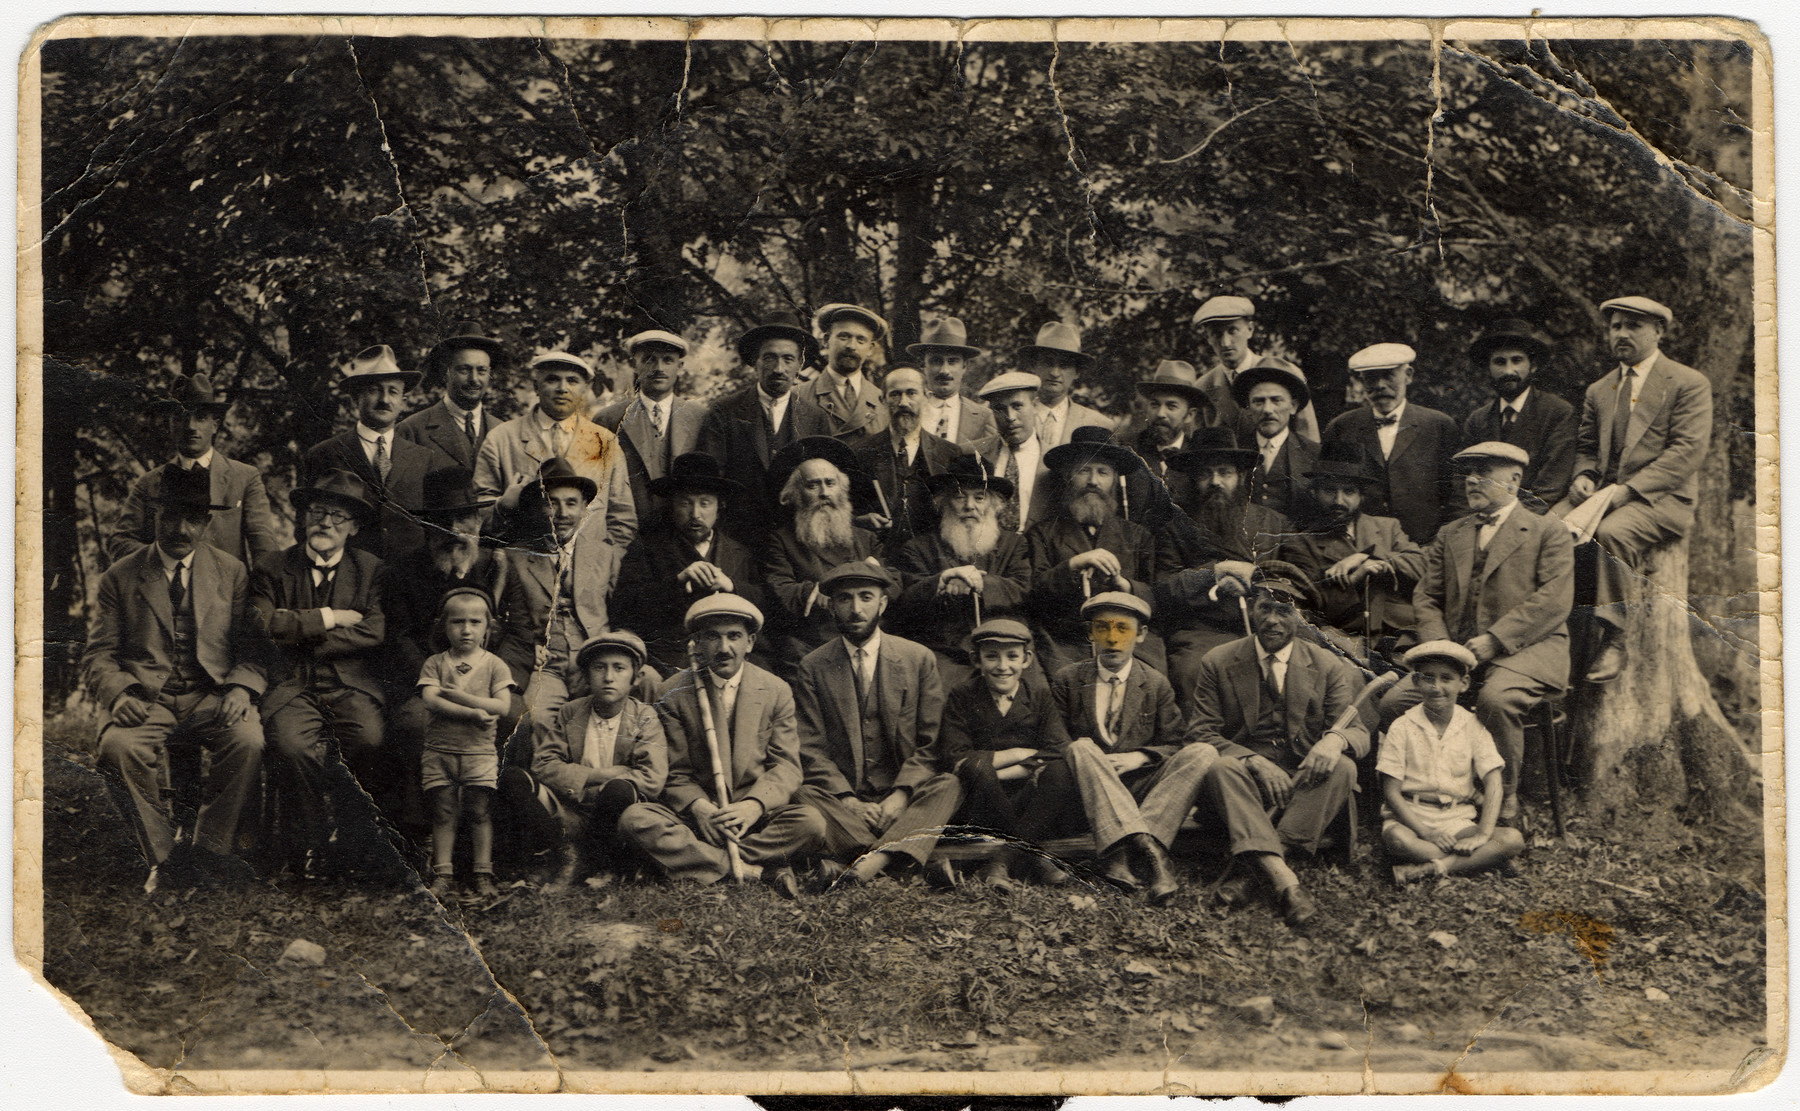 Jewish men from the vicinity of Komarom gather to cut wheat for shmurah matzah for the upcoming Passover holiday.

Among those pictured are  Rabbi Jozsua Lefkovics from Komarom (2nd row, 4th from the right ) and Jeno Schwarcz (3rd row, 3rd from right in white cap and bowtie).